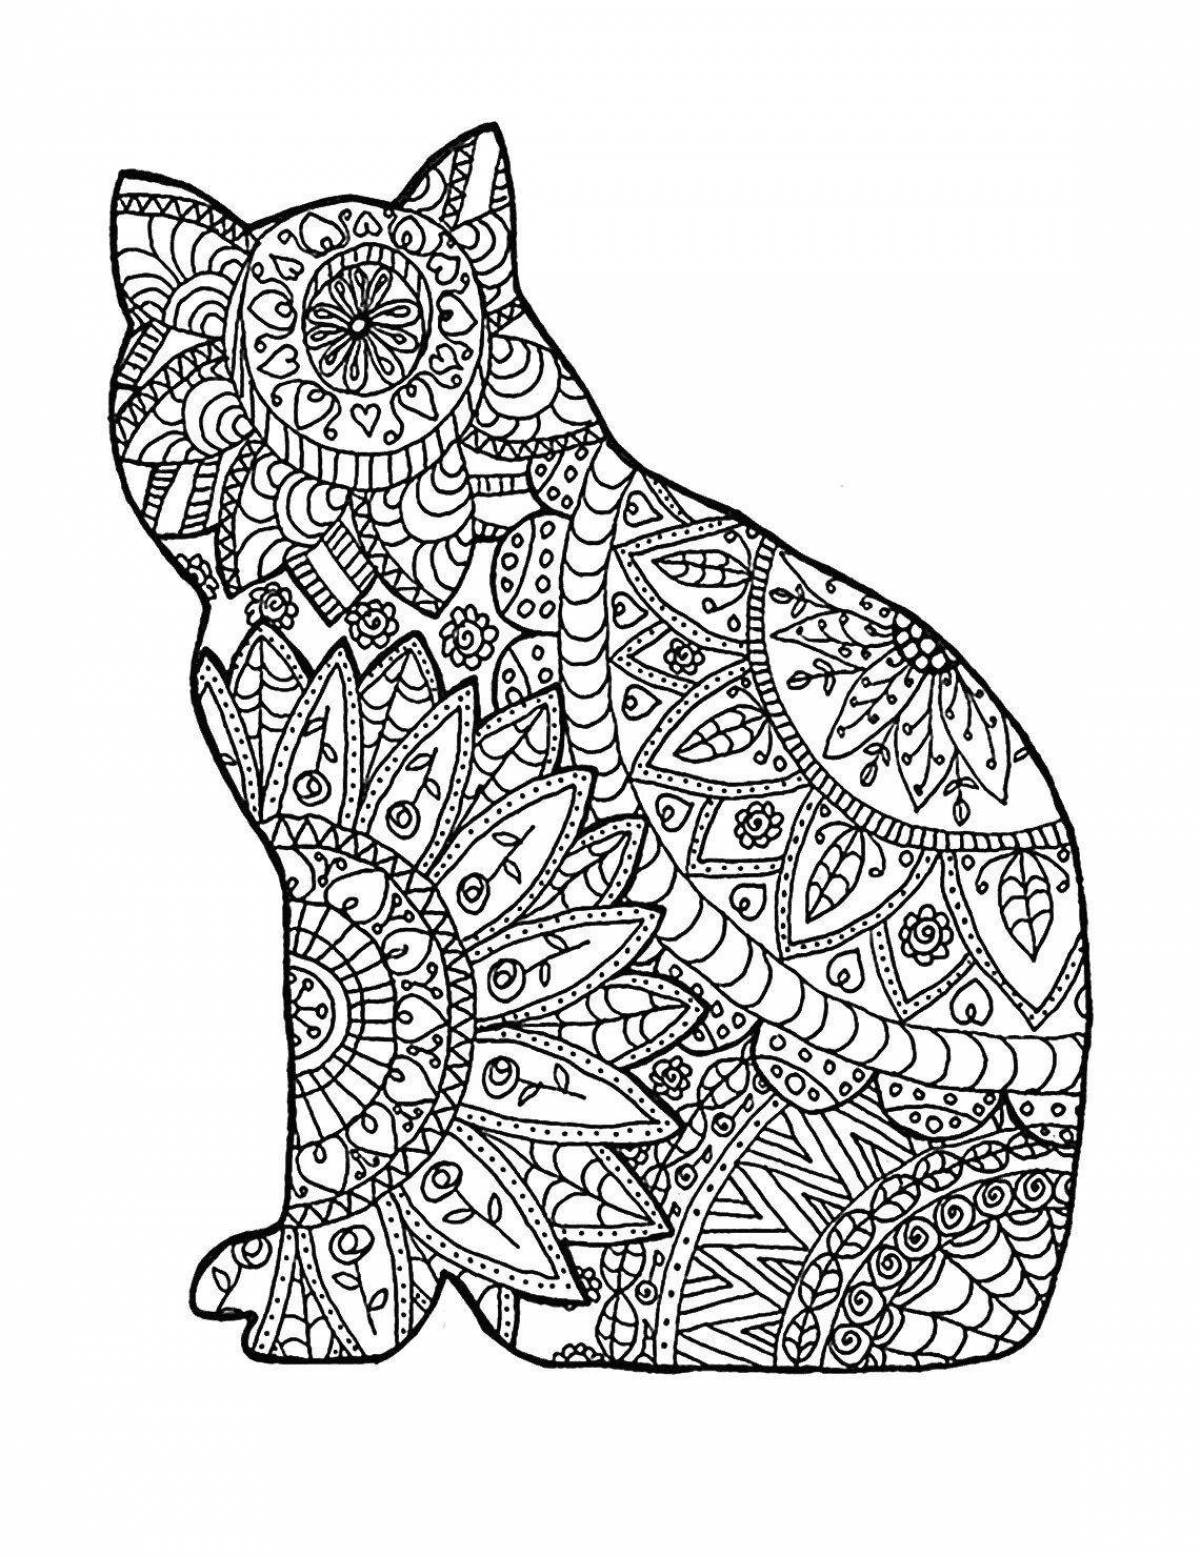 Fun coloring book with detailed design